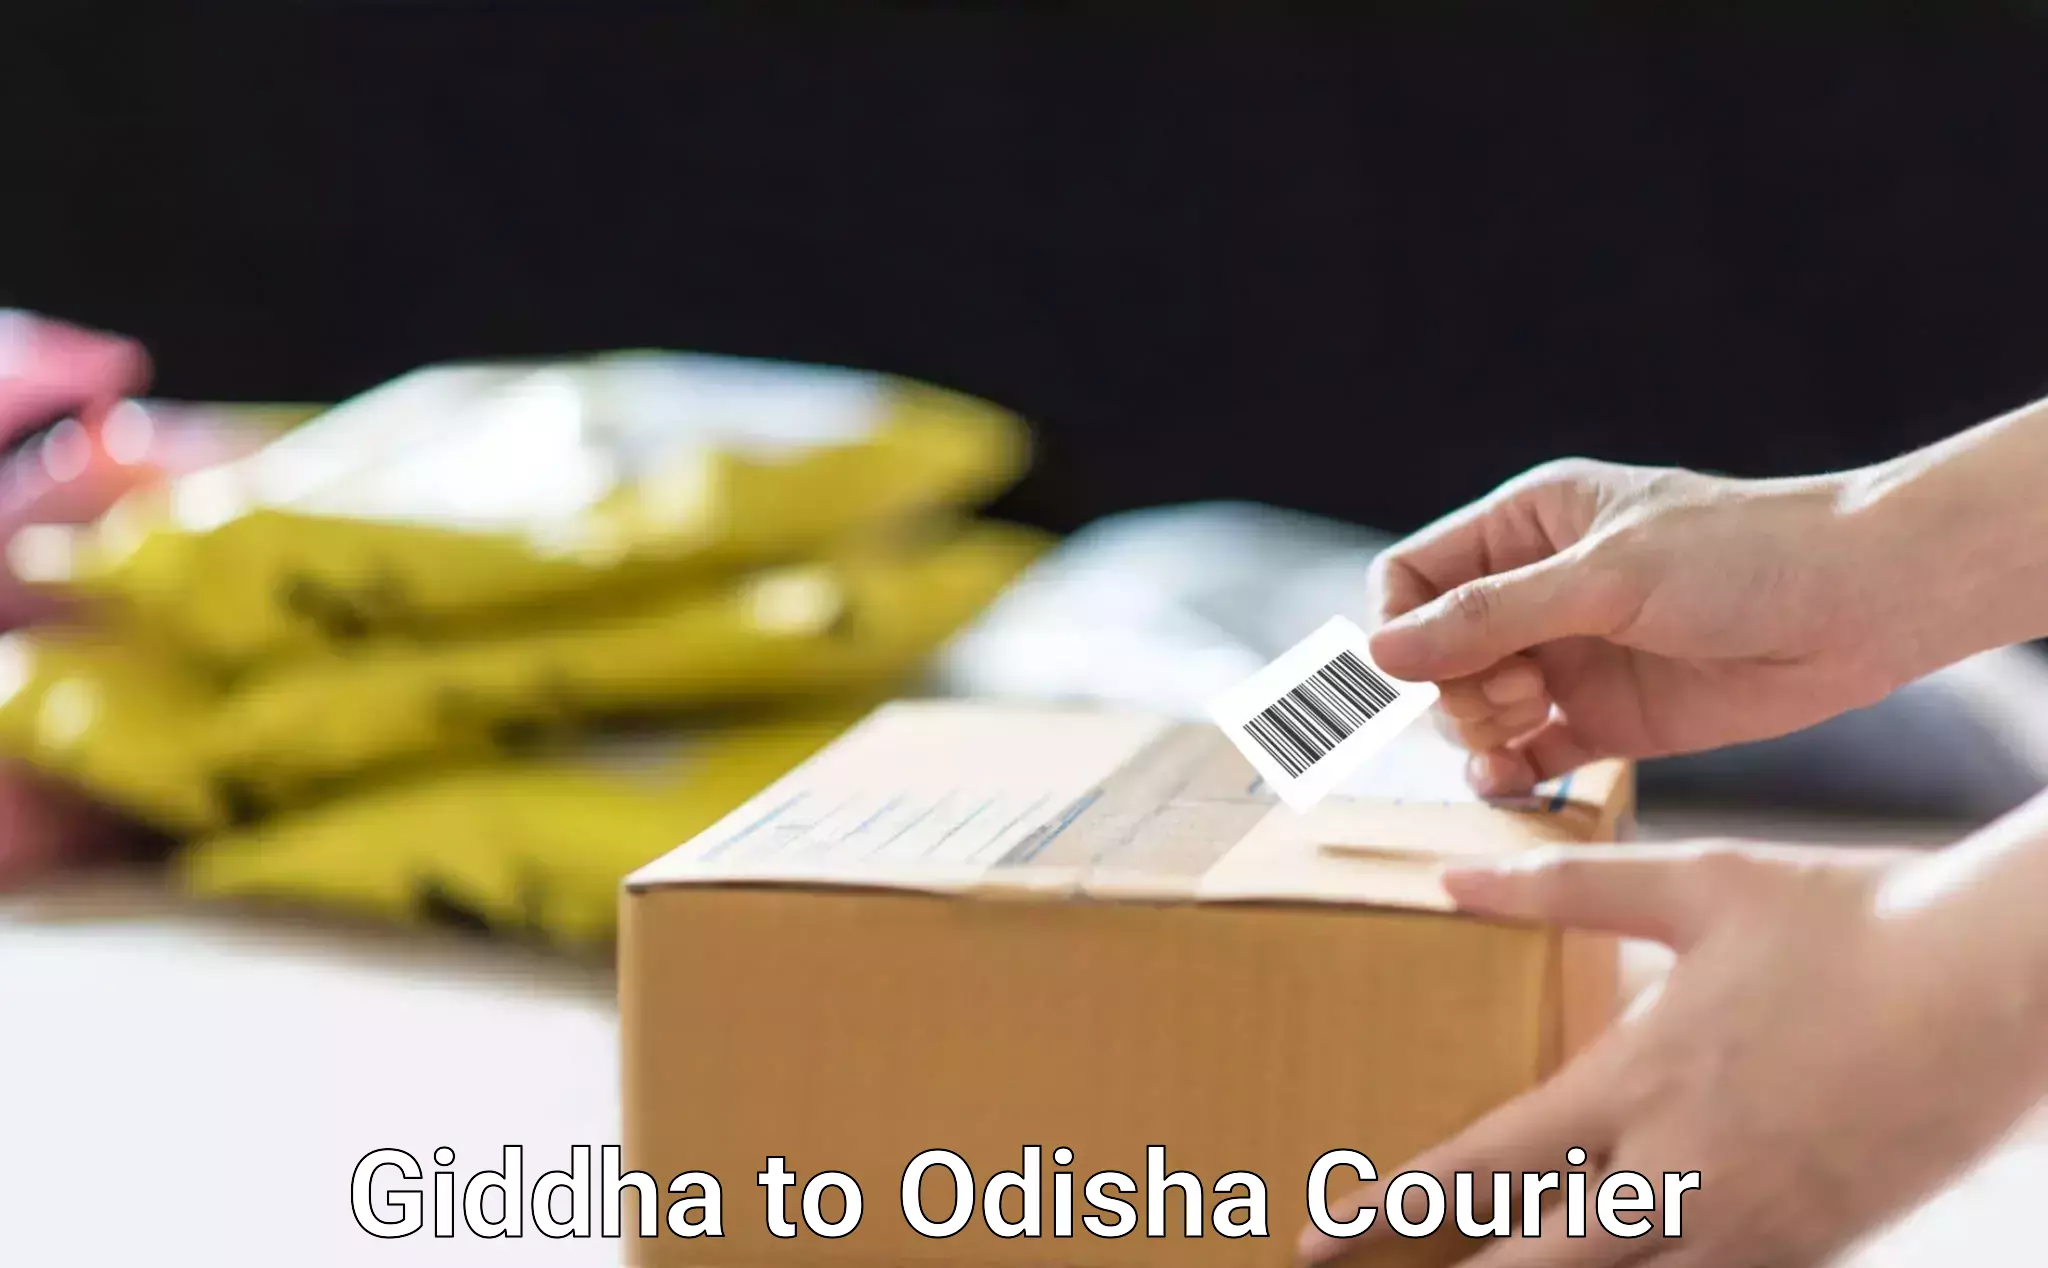 Hassle-free relocation in Giddha to Ukhunda